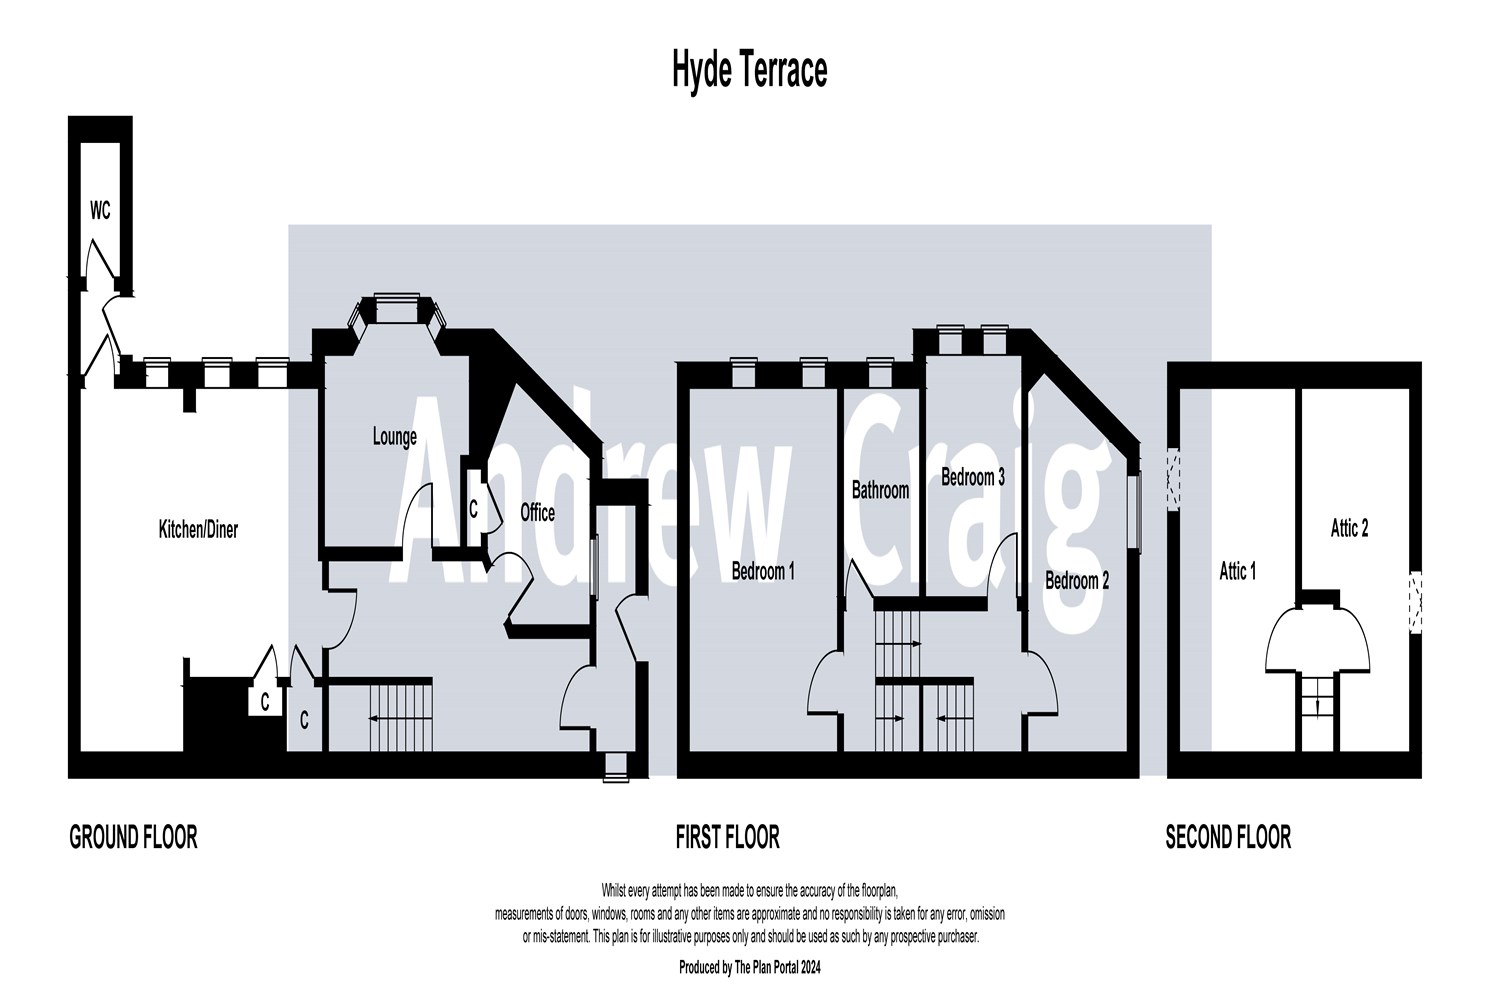 3 bed end of terrace house for sale in Hyde Terrace, Gosforth - Property floorplan